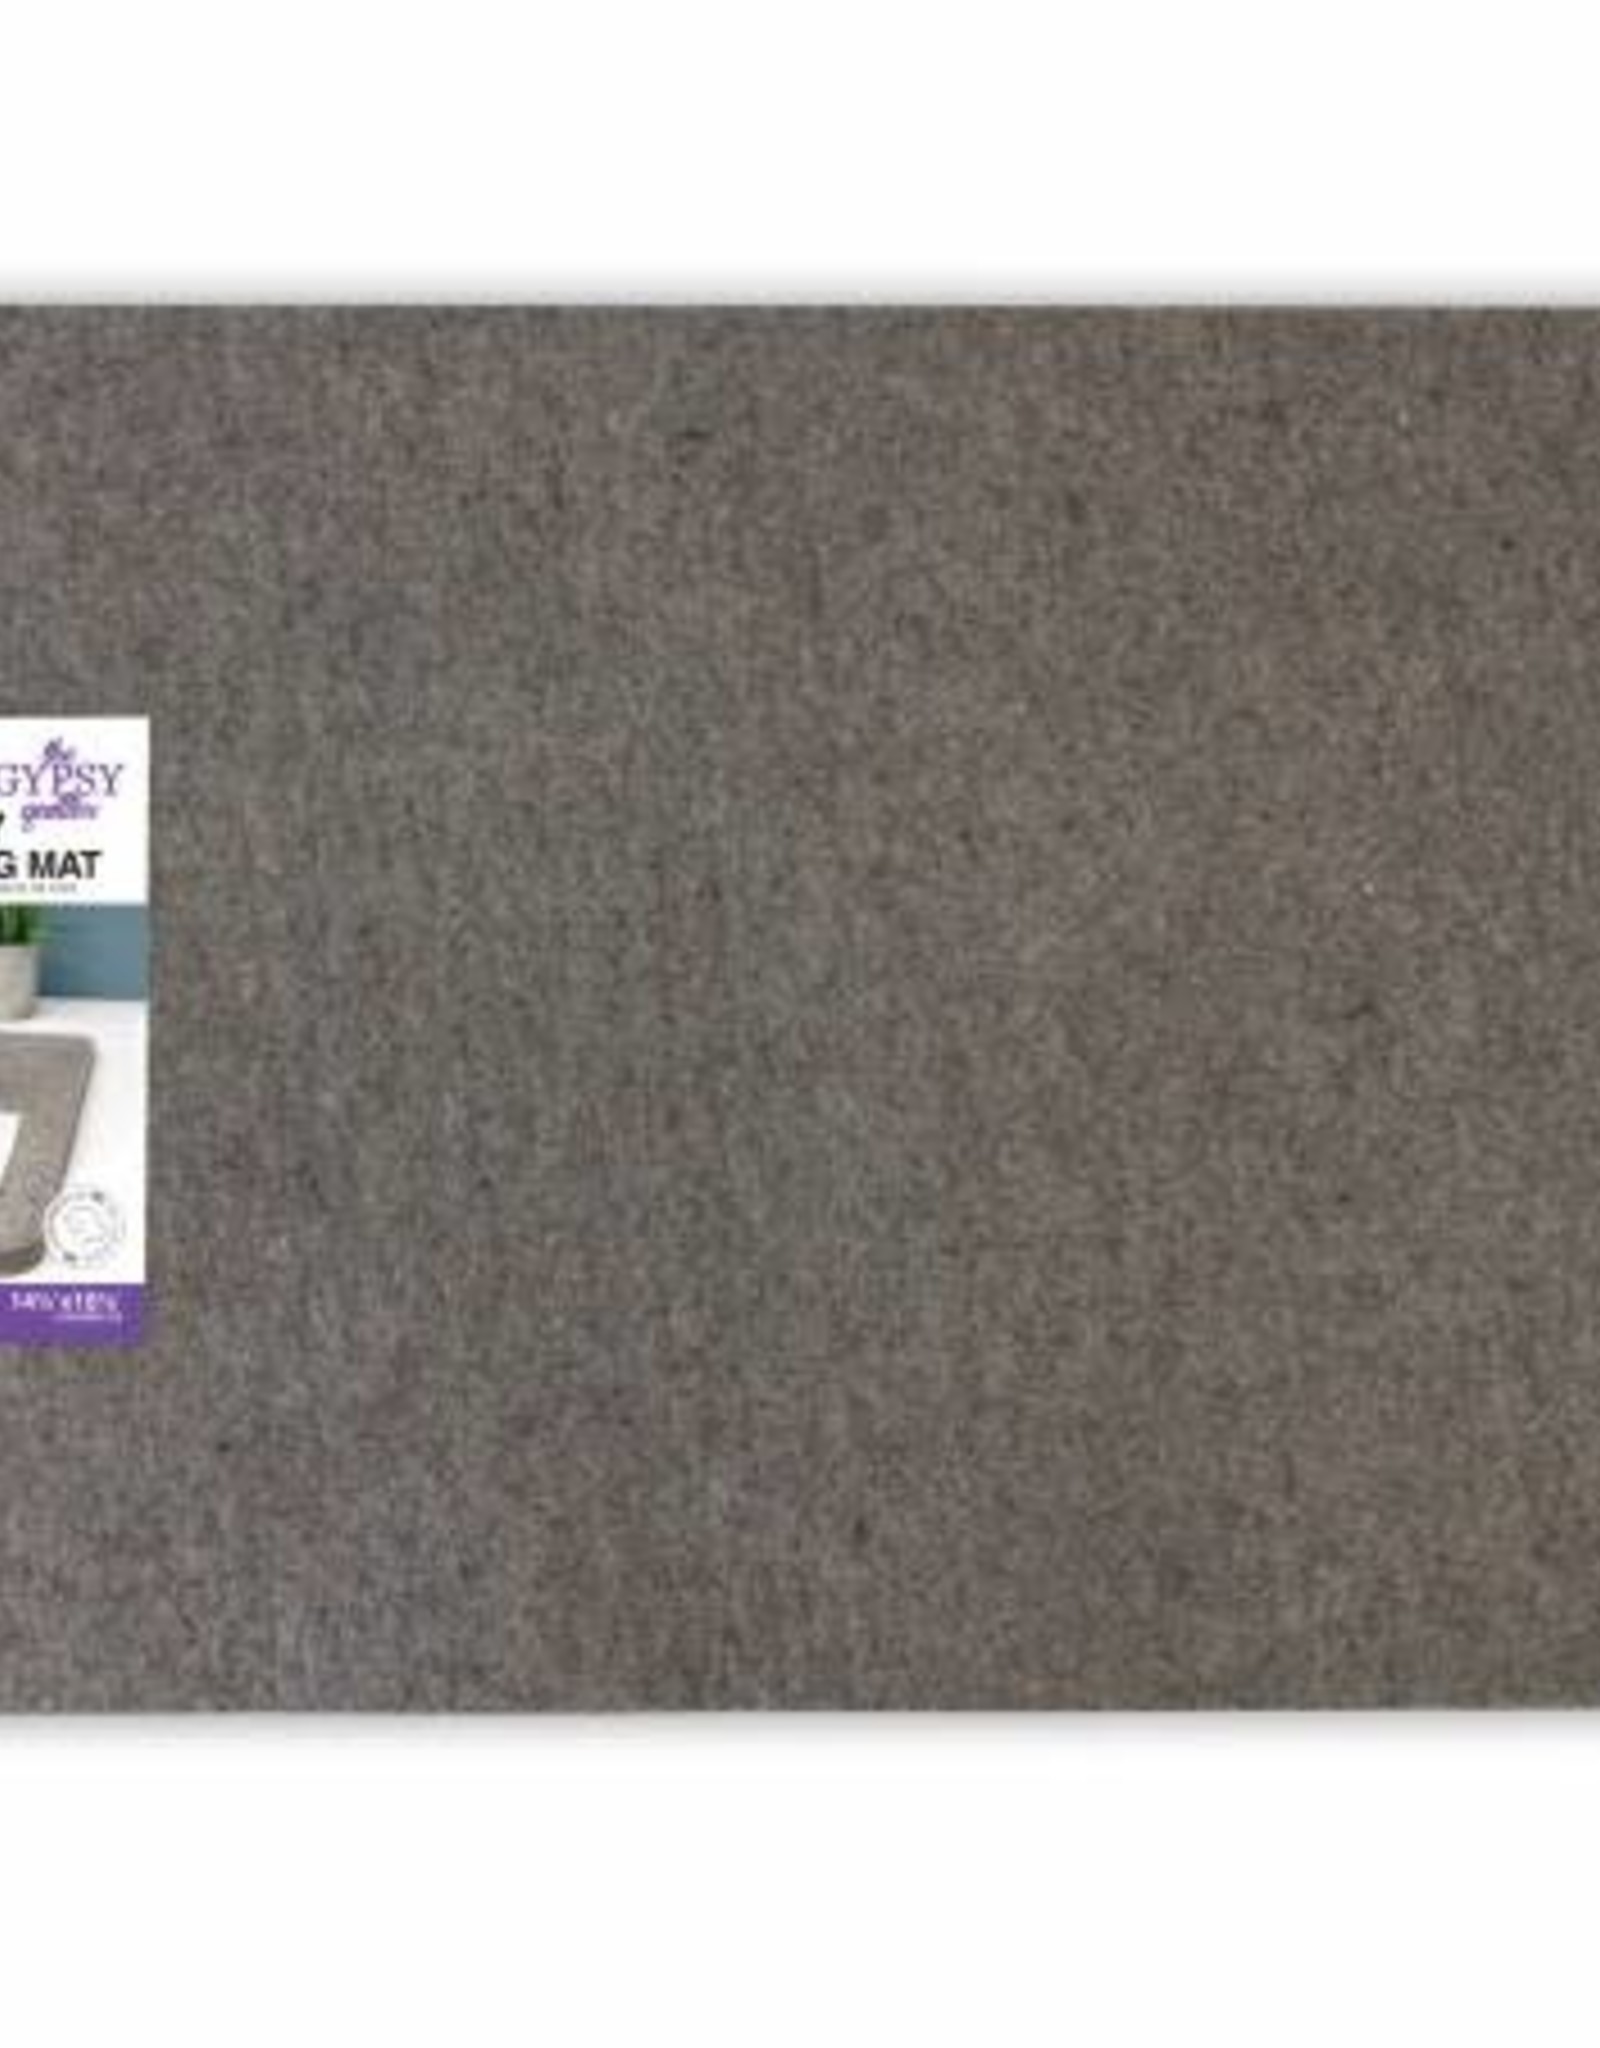 Wool Pressing Mat 14-1/3in Wide x 18-7/8in Long x 1/2in Thick